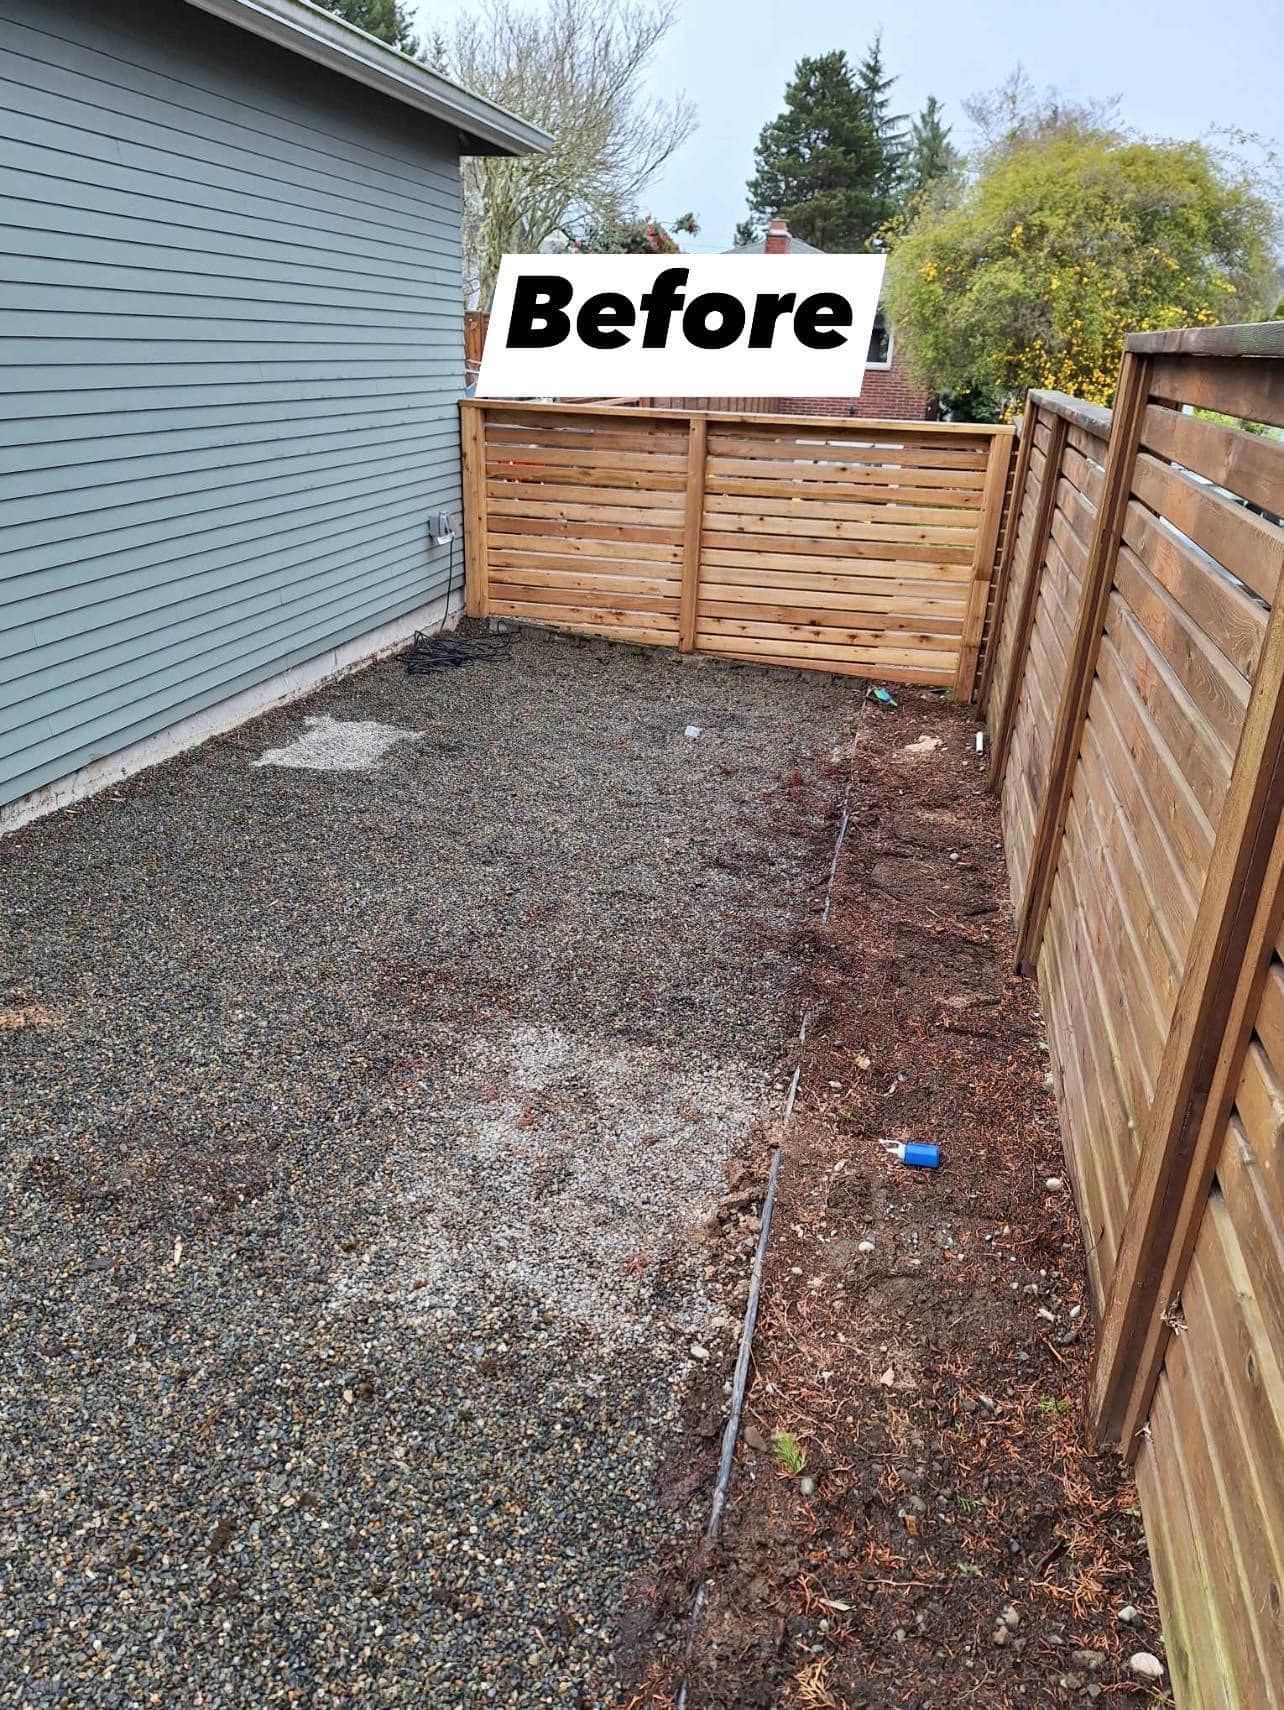 SEATTLE CONCRETE PAD PROJECT - Before